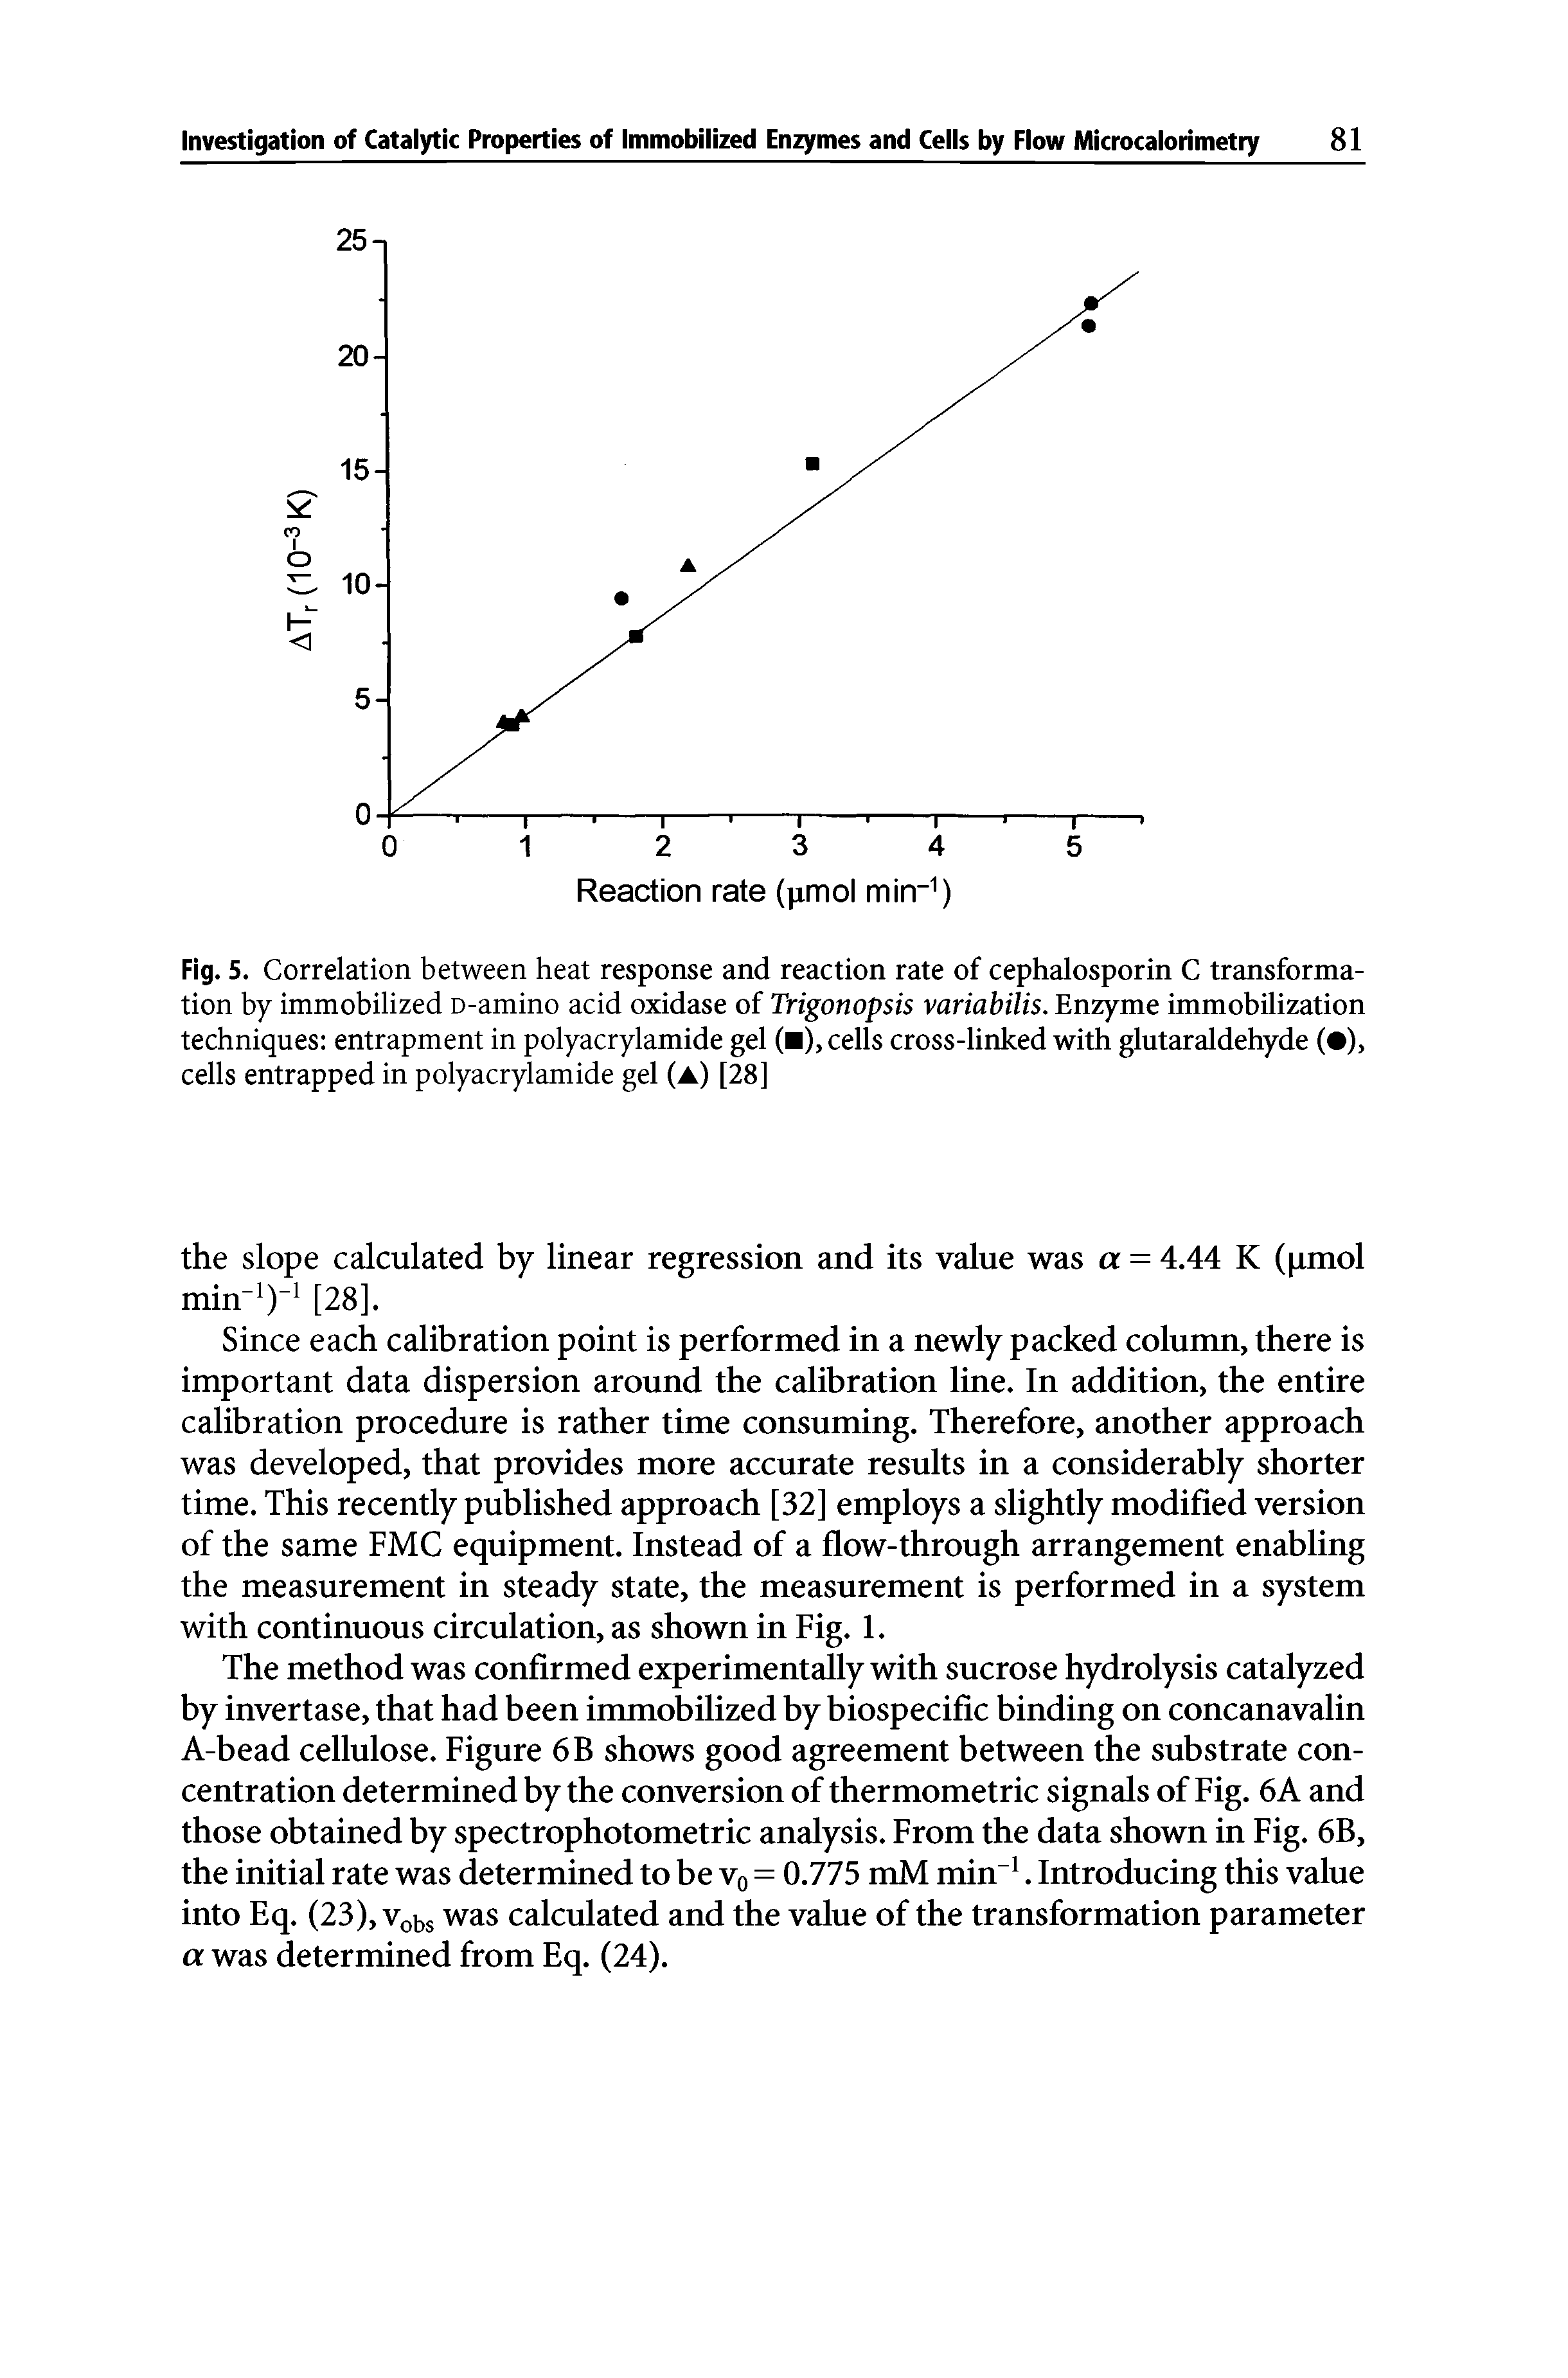 Fig. 5. Correlation between heat response and reaction rate of cephalosporin C transformation by immobilized D-amino acid oxidase of Trigonopsis variabilis. Enzyme immobilization techniques entrapment in polyacrylamide gel ( ), cells cross-linked with glutaraldehyde ( ), cells entrapped in polyacrylamide gel (a) [28]...